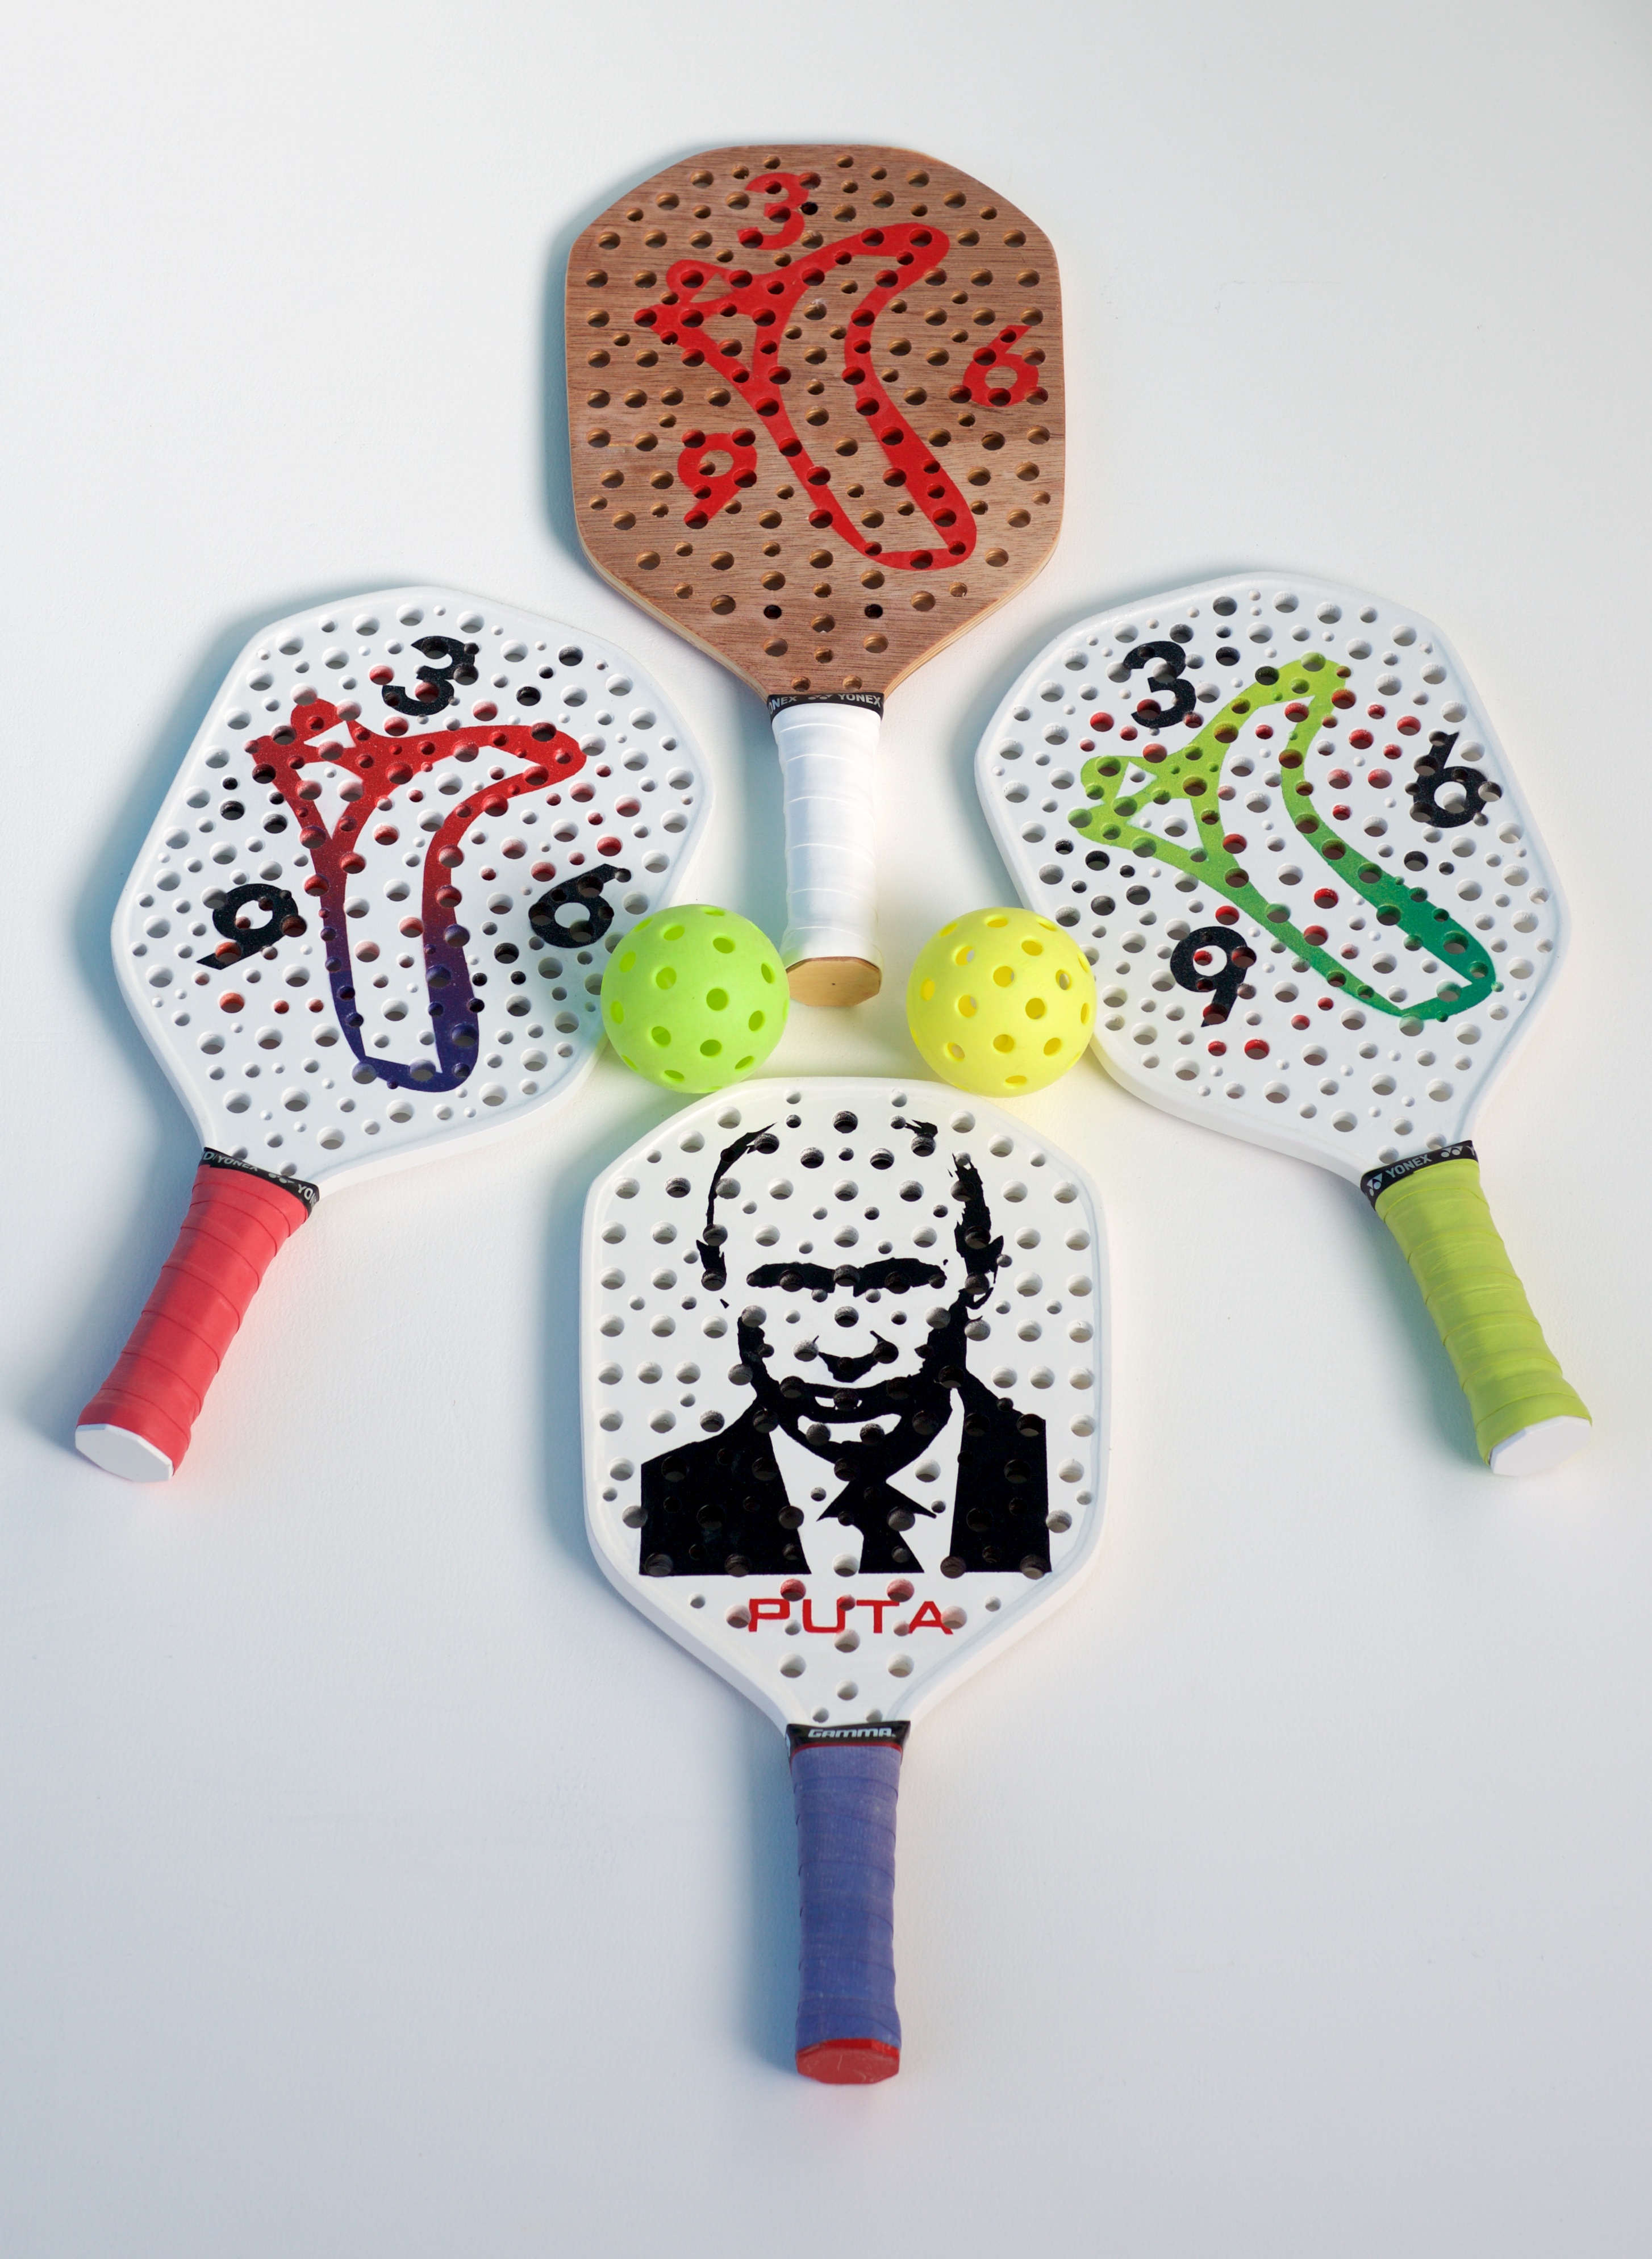 4 New 'Dirk Marwig 369' pickleball rackets.
Made of plywood. *Low in "noise", High in "power and spin".
The only pickleball rackets in the world like this. My Logo and patent.